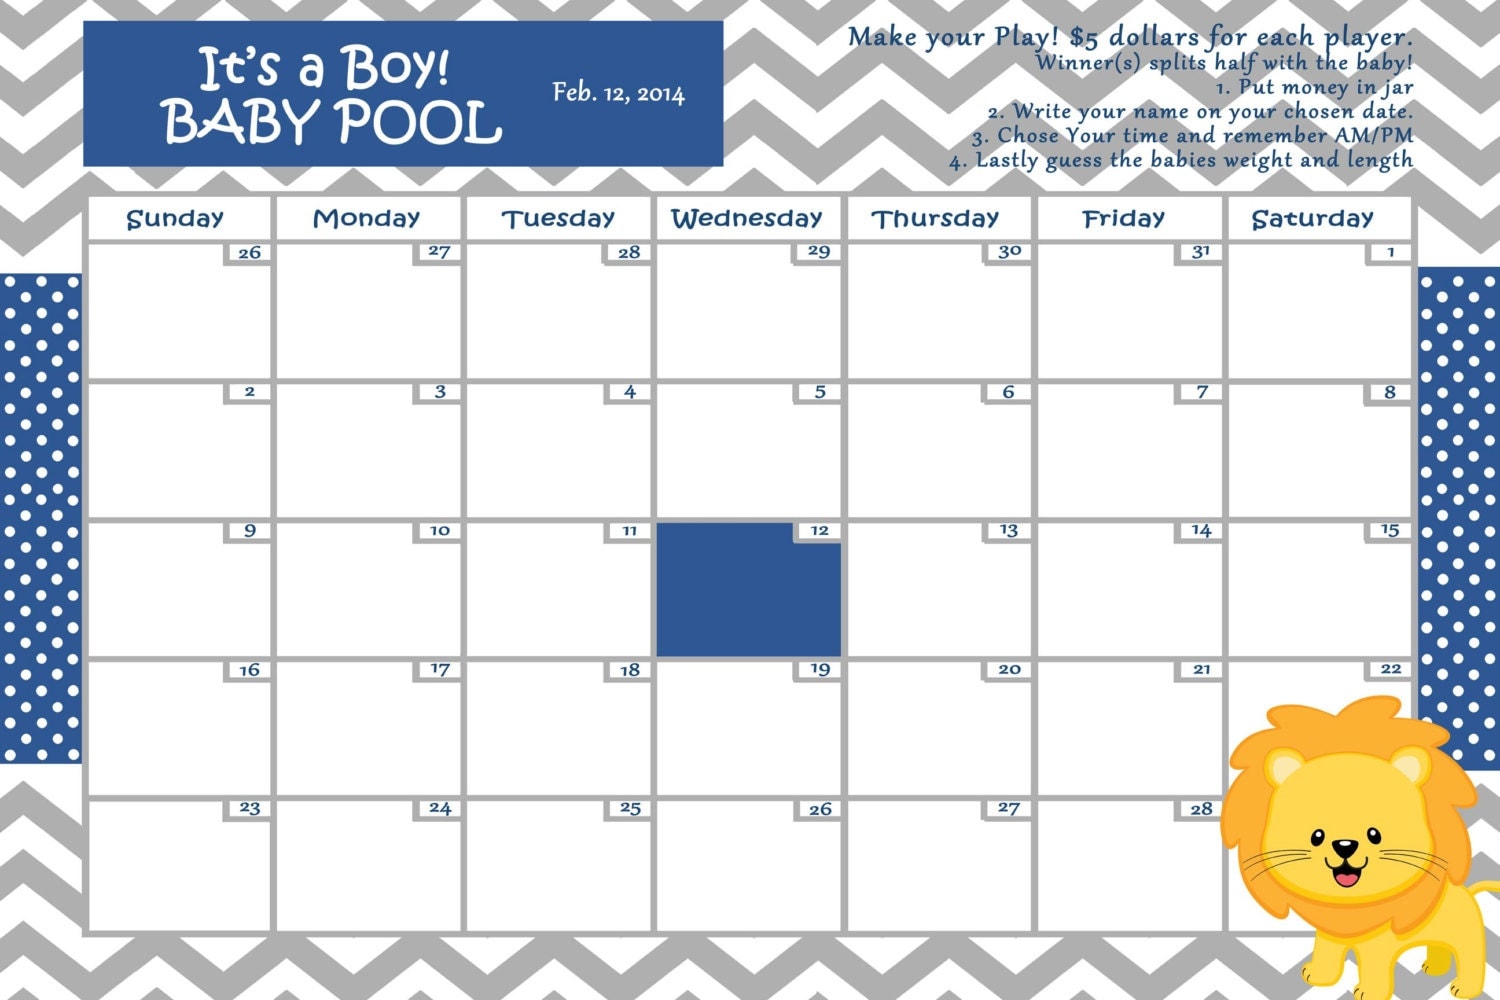 Customize Baby Calendar for Baby Shower Pool Game by nguyensarah